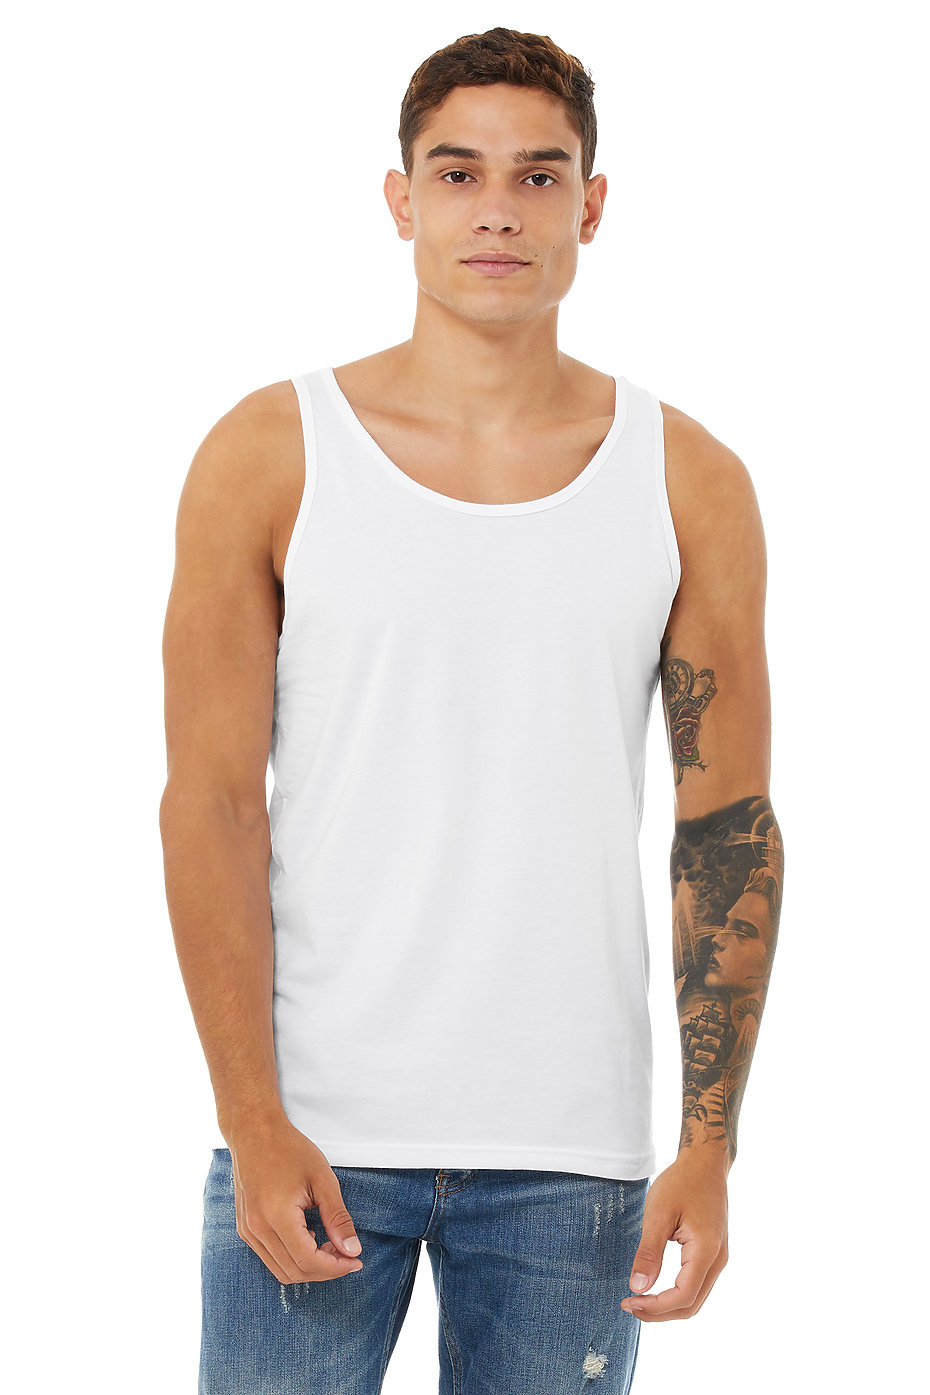 Wholesale Ladies' Tank Tops (XS - 2XL) in Canada